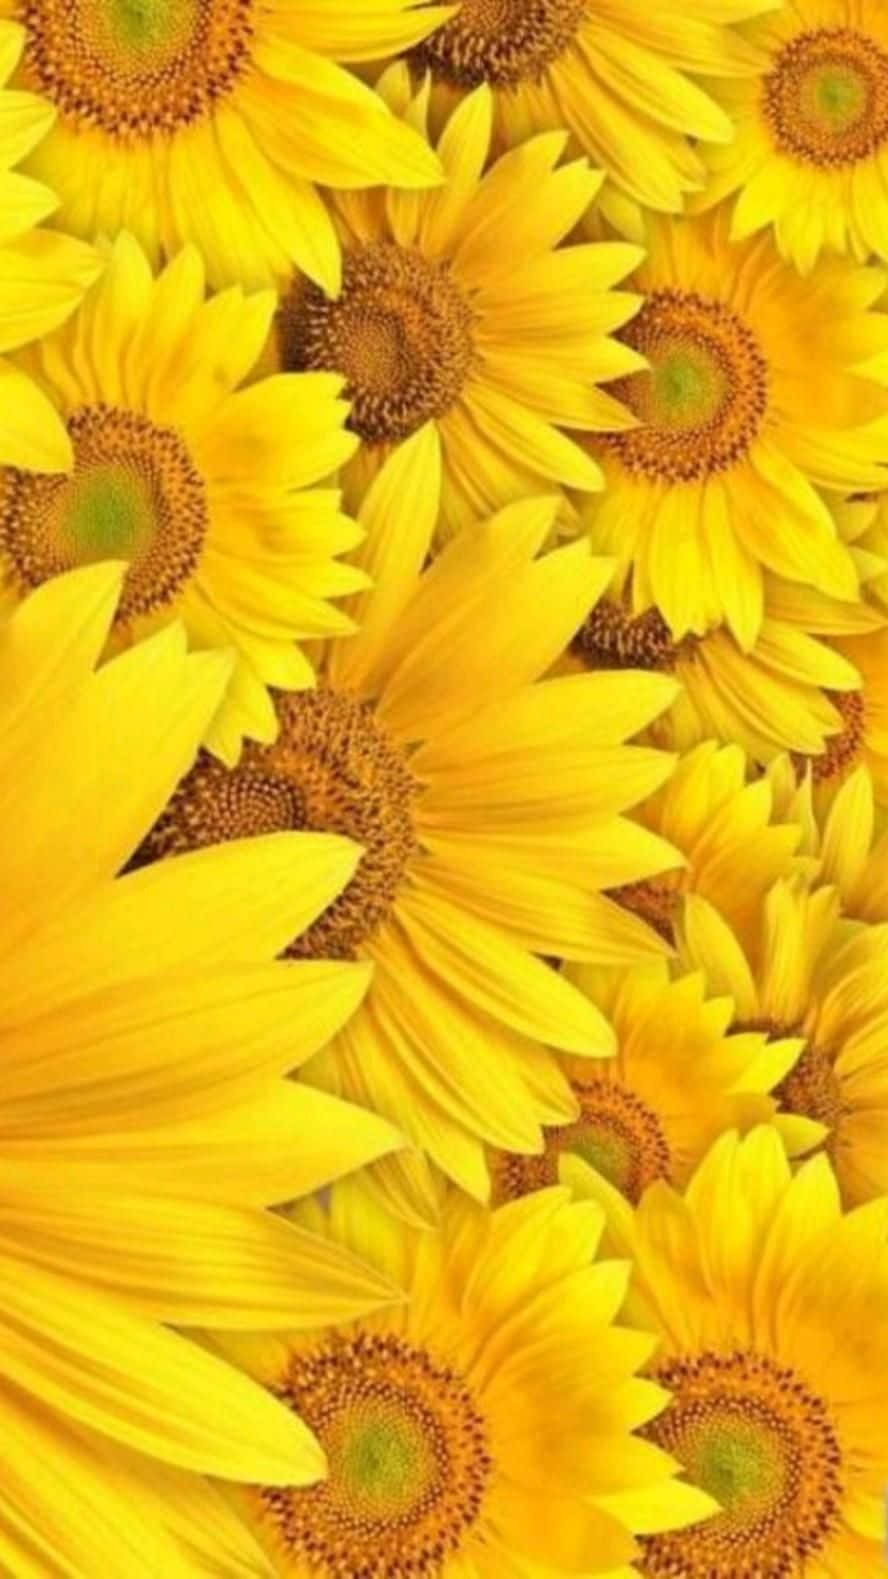 A cheerful sunflower in sunny yellow. Wallpaper